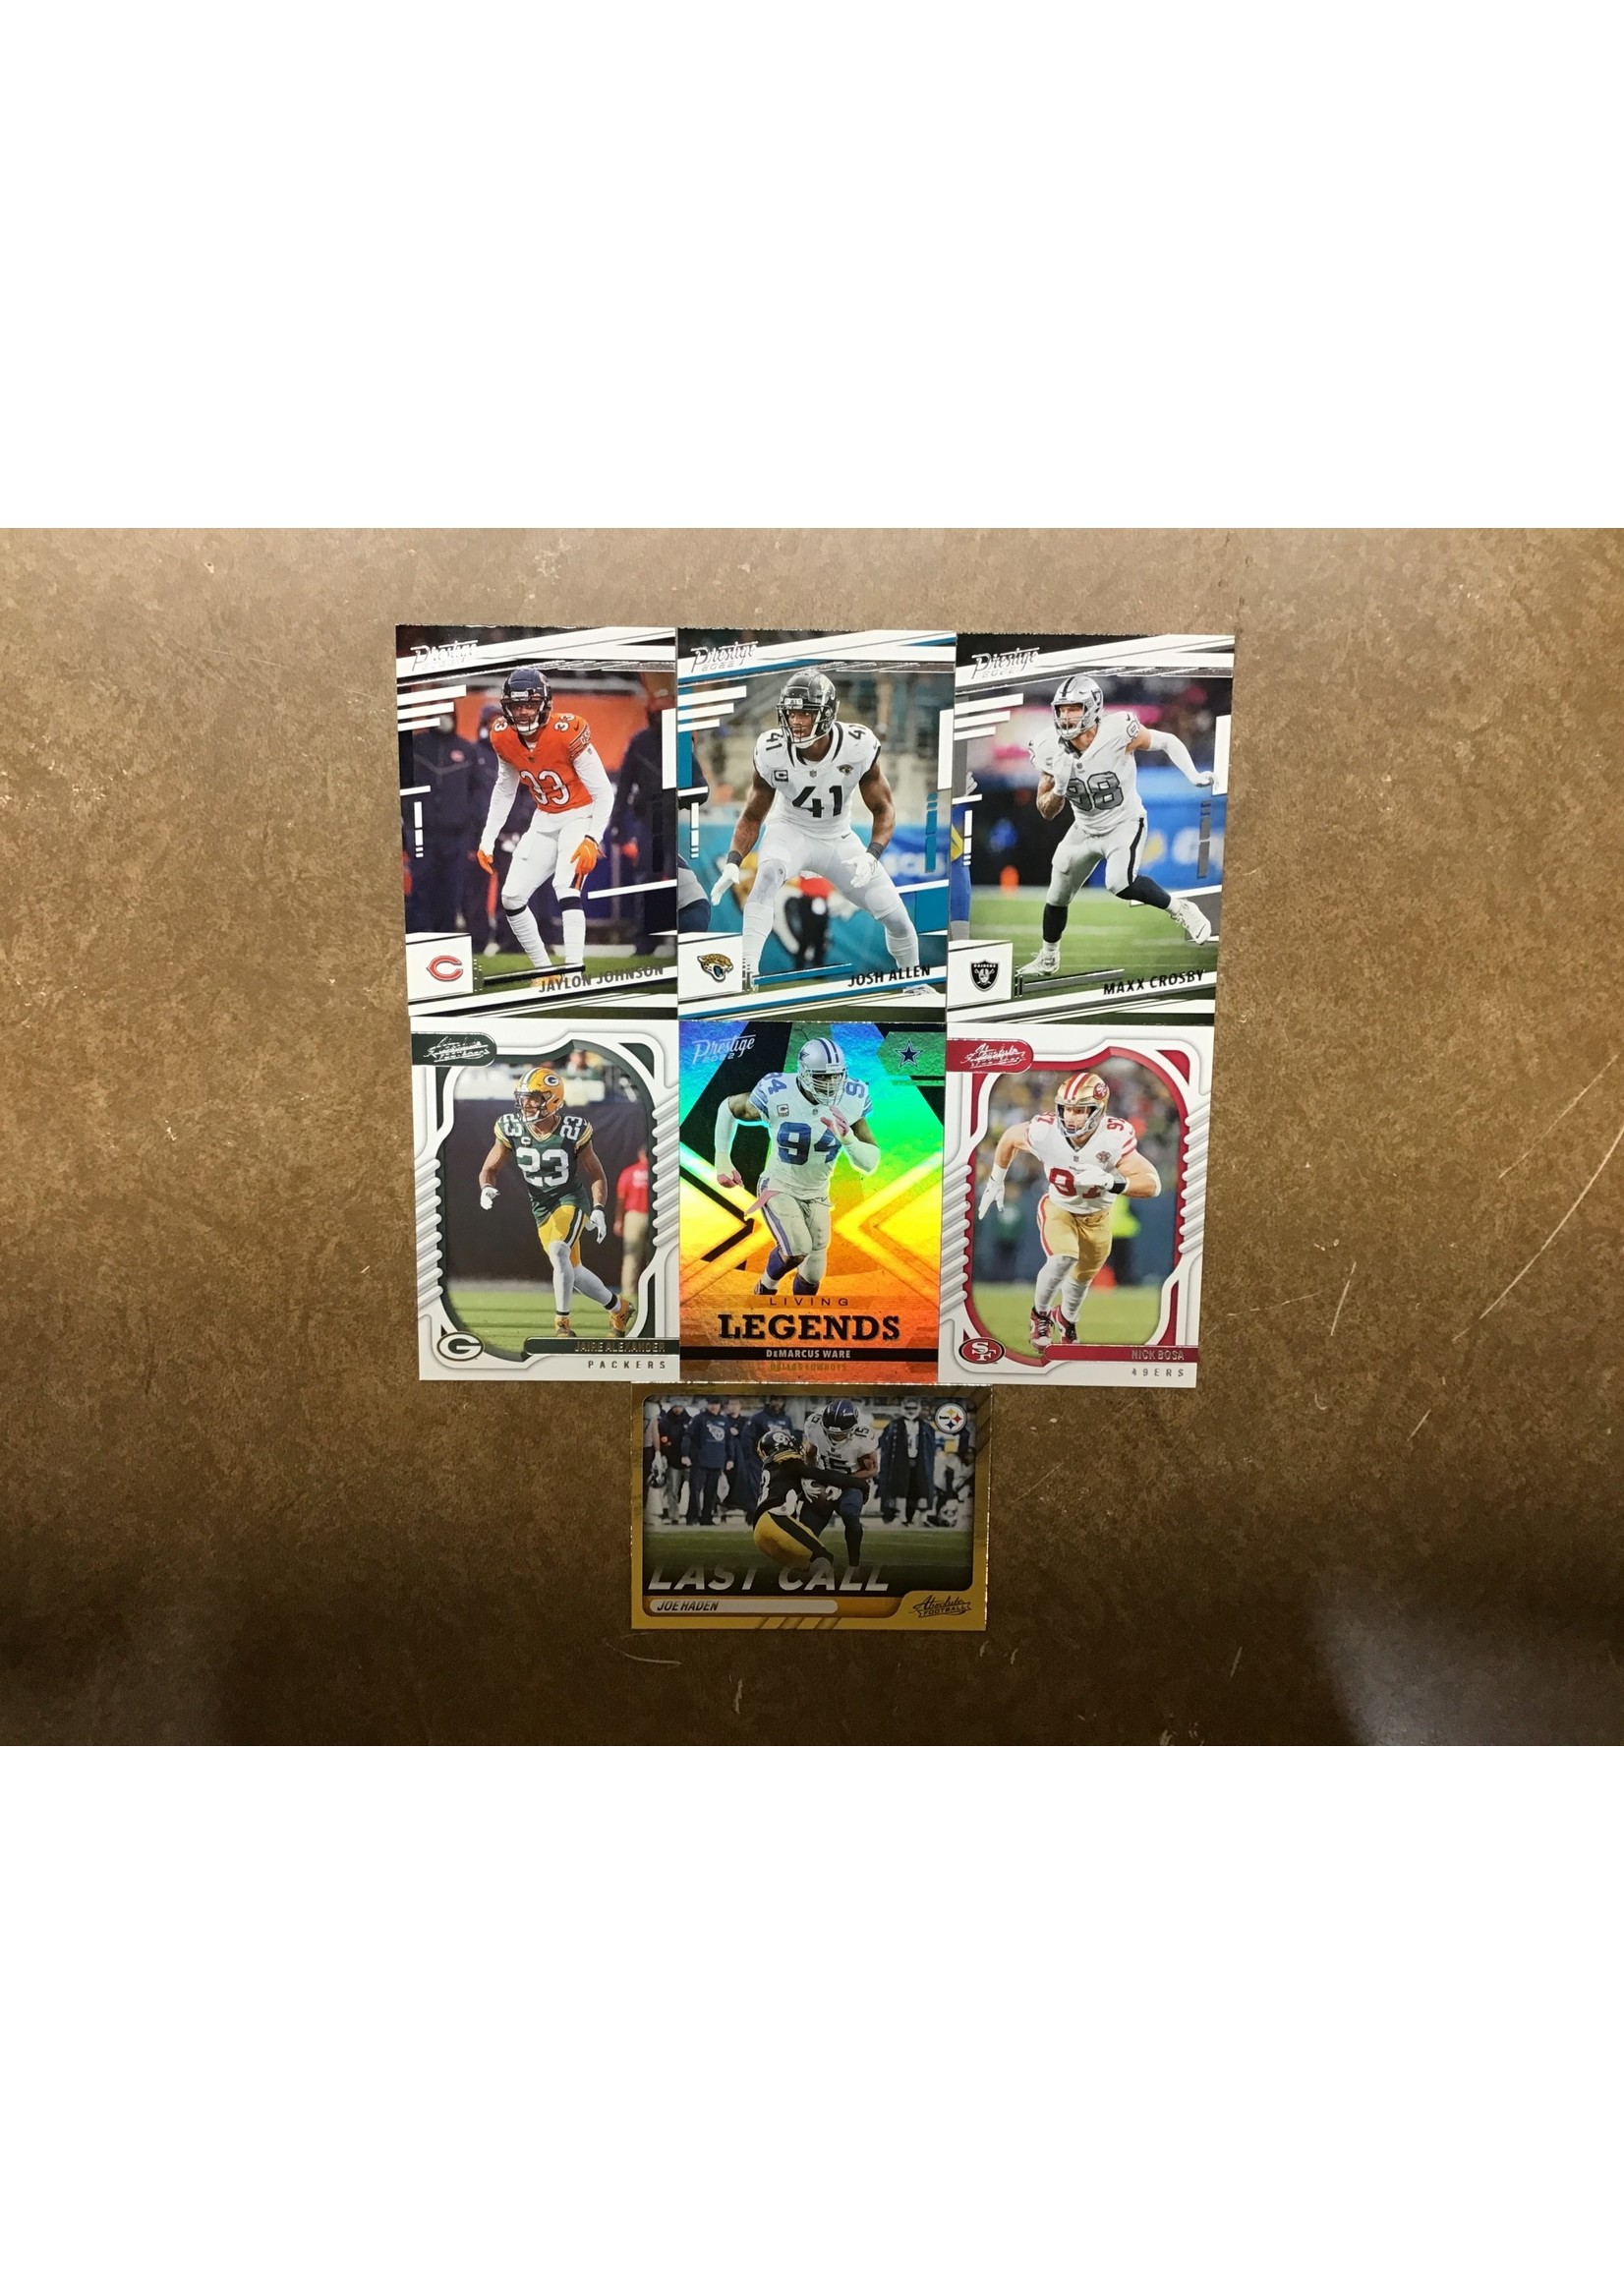 Lot of 7 Panini Def Cards NFL ( Legends Ware, Last Call Haden…)